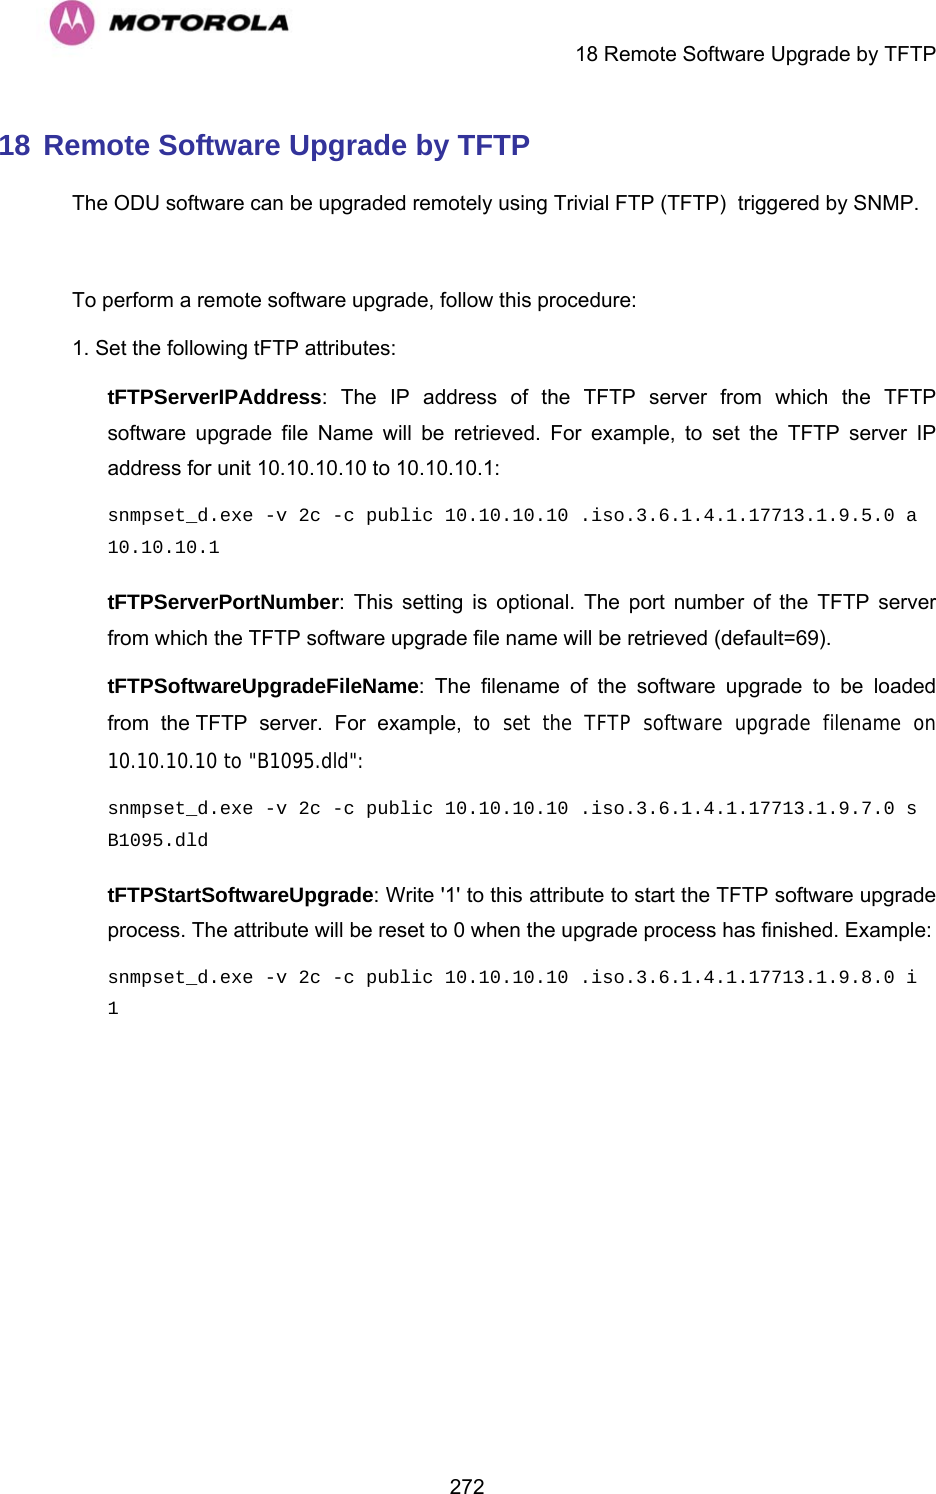     18 Remote Software Upgrade by TFTP  27218 Remote Software Upgrade by TFTP The ODU software can be upgraded remotely using Trivial FTP (TFTP)  triggered by SNMP.    To perform a remote software upgrade, follow this procedure: 1. Set the following tFTP attributes: tFTPServerIPAddress: The IP address of the TFTP server from which the TFTP software upgrade file Name will be retrieved. For example, to set the TFTP server IP address for unit 10.10.10.10 to 10.10.10.1: snmpset_d.exe -v 2c -c public 10.10.10.10 .iso.3.6.1.4.1.17713.1.9.5.0 a 10.10.10.1 tFTPServerPortNumber: This setting is optional. The port number of the TFTP server from which the TFTP software upgrade file name will be retrieved (default=69). tFTPSoftwareUpgradeFileName: The filename of the software upgrade to be loaded from the TFTP server. For example, to set the TFTP software upgrade filename on 10.10.10.10 to &quot;B1095.dld&quot;: snmpset_d.exe -v 2c -c public 10.10.10.10 .iso.3.6.1.4.1.17713.1.9.7.0 s B1095.dld tFTPStartSoftwareUpgrade: Write &apos;1&apos; to this attribute to start the TFTP software upgrade process. The attribute will be reset to 0 when the upgrade process has finished. Example: snmpset_d.exe -v 2c -c public 10.10.10.10 .iso.3.6.1.4.1.17713.1.9.8.0 i 1   